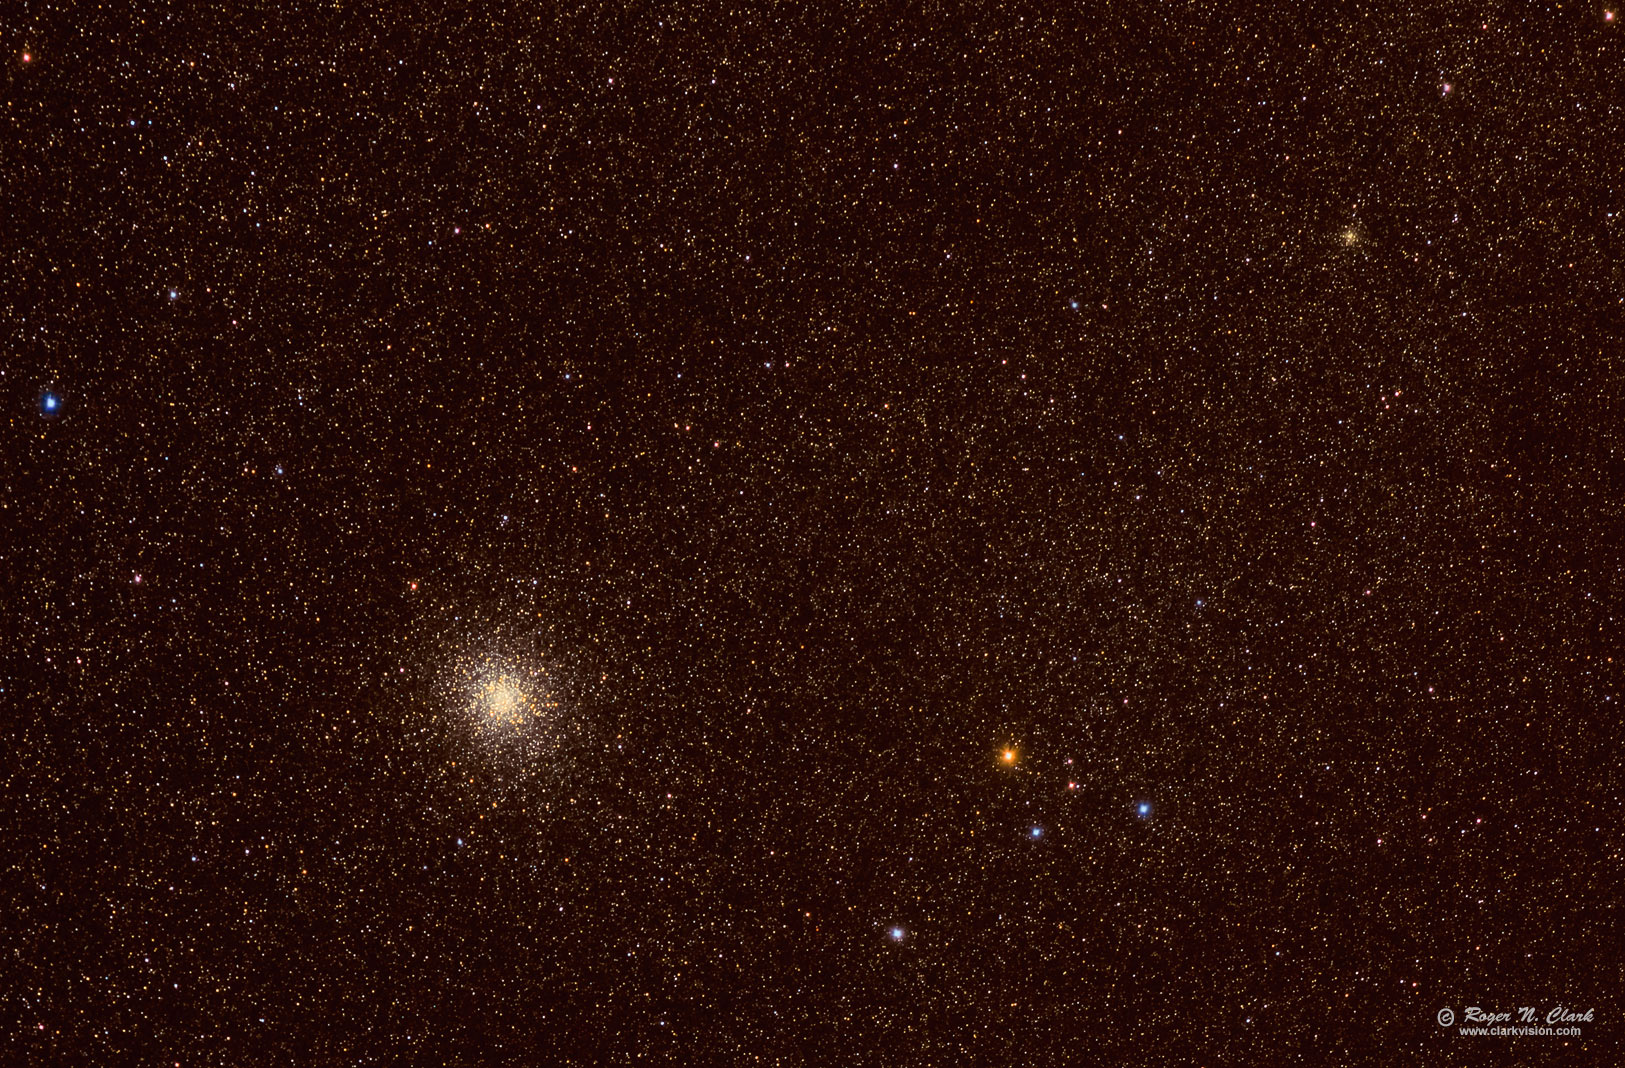 image m22-globular-cluster.c08.13.2015.0J6A5340-49-t7-rs200-c0.5x-1625s.jpg is Copyrighted by Roger N. Clark, www.clarkvision.com